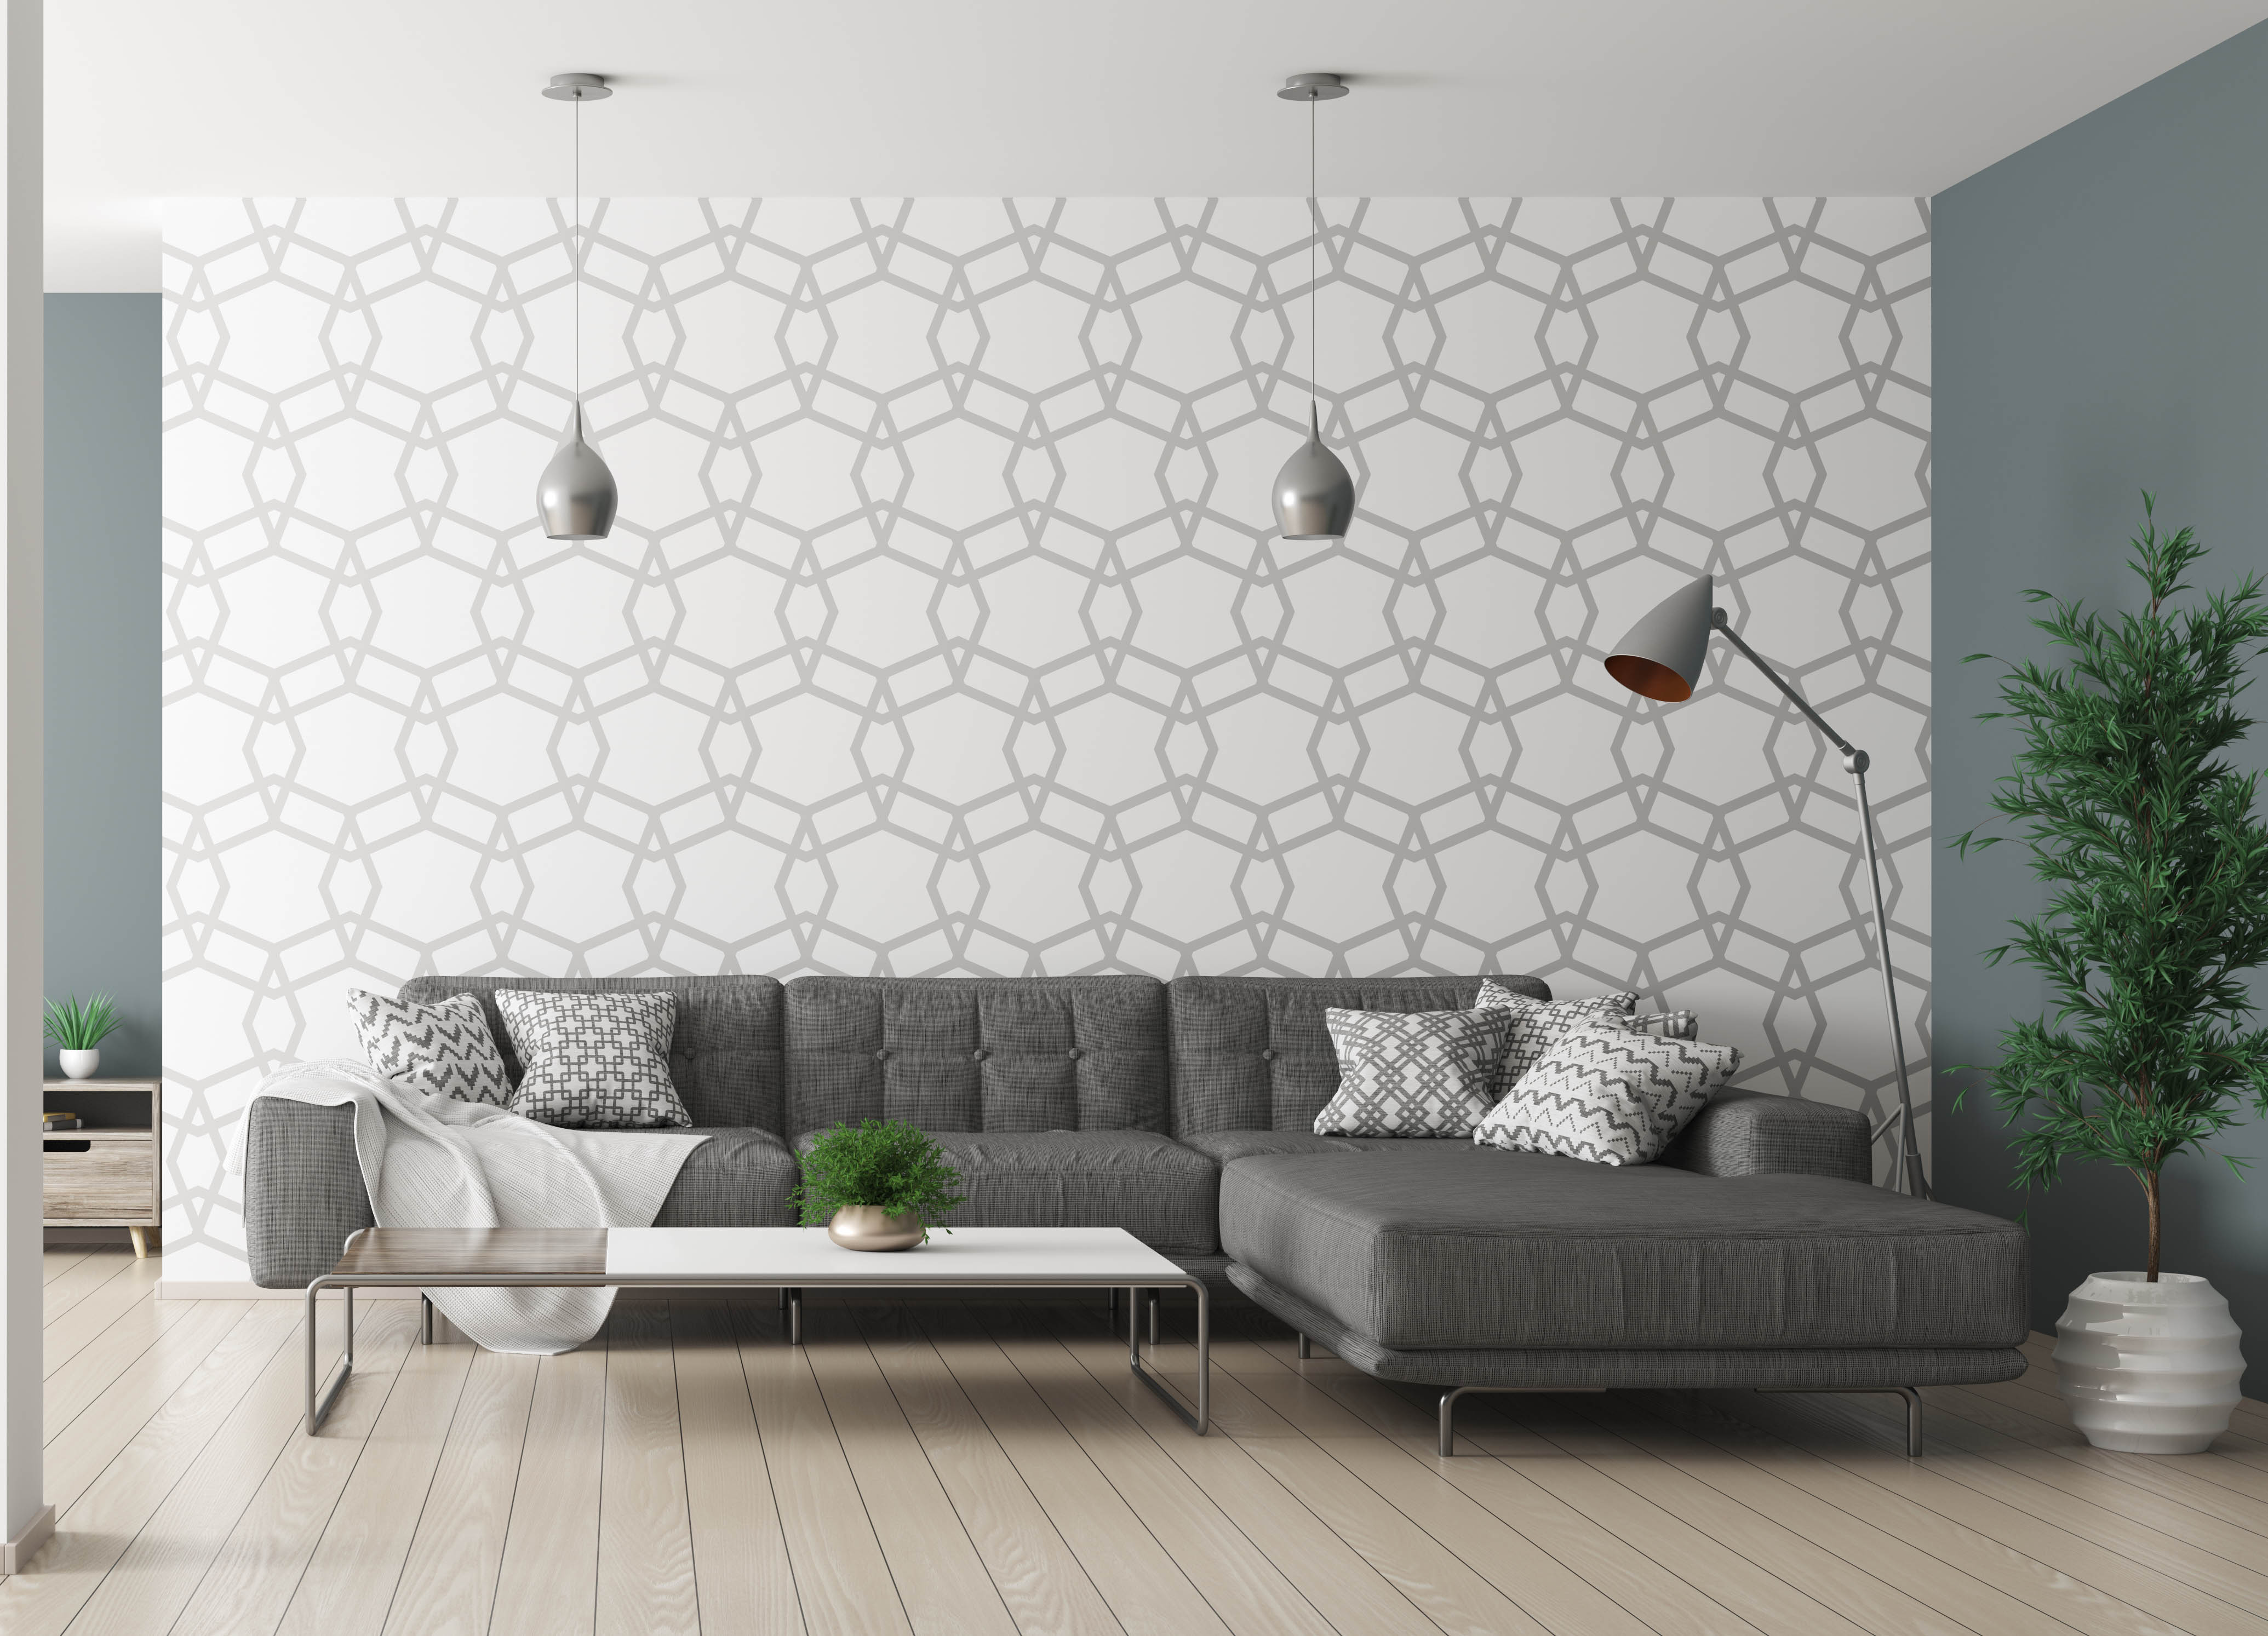 How to Decorate with Wallpaper - Tips for Using Wallpaper in Homes